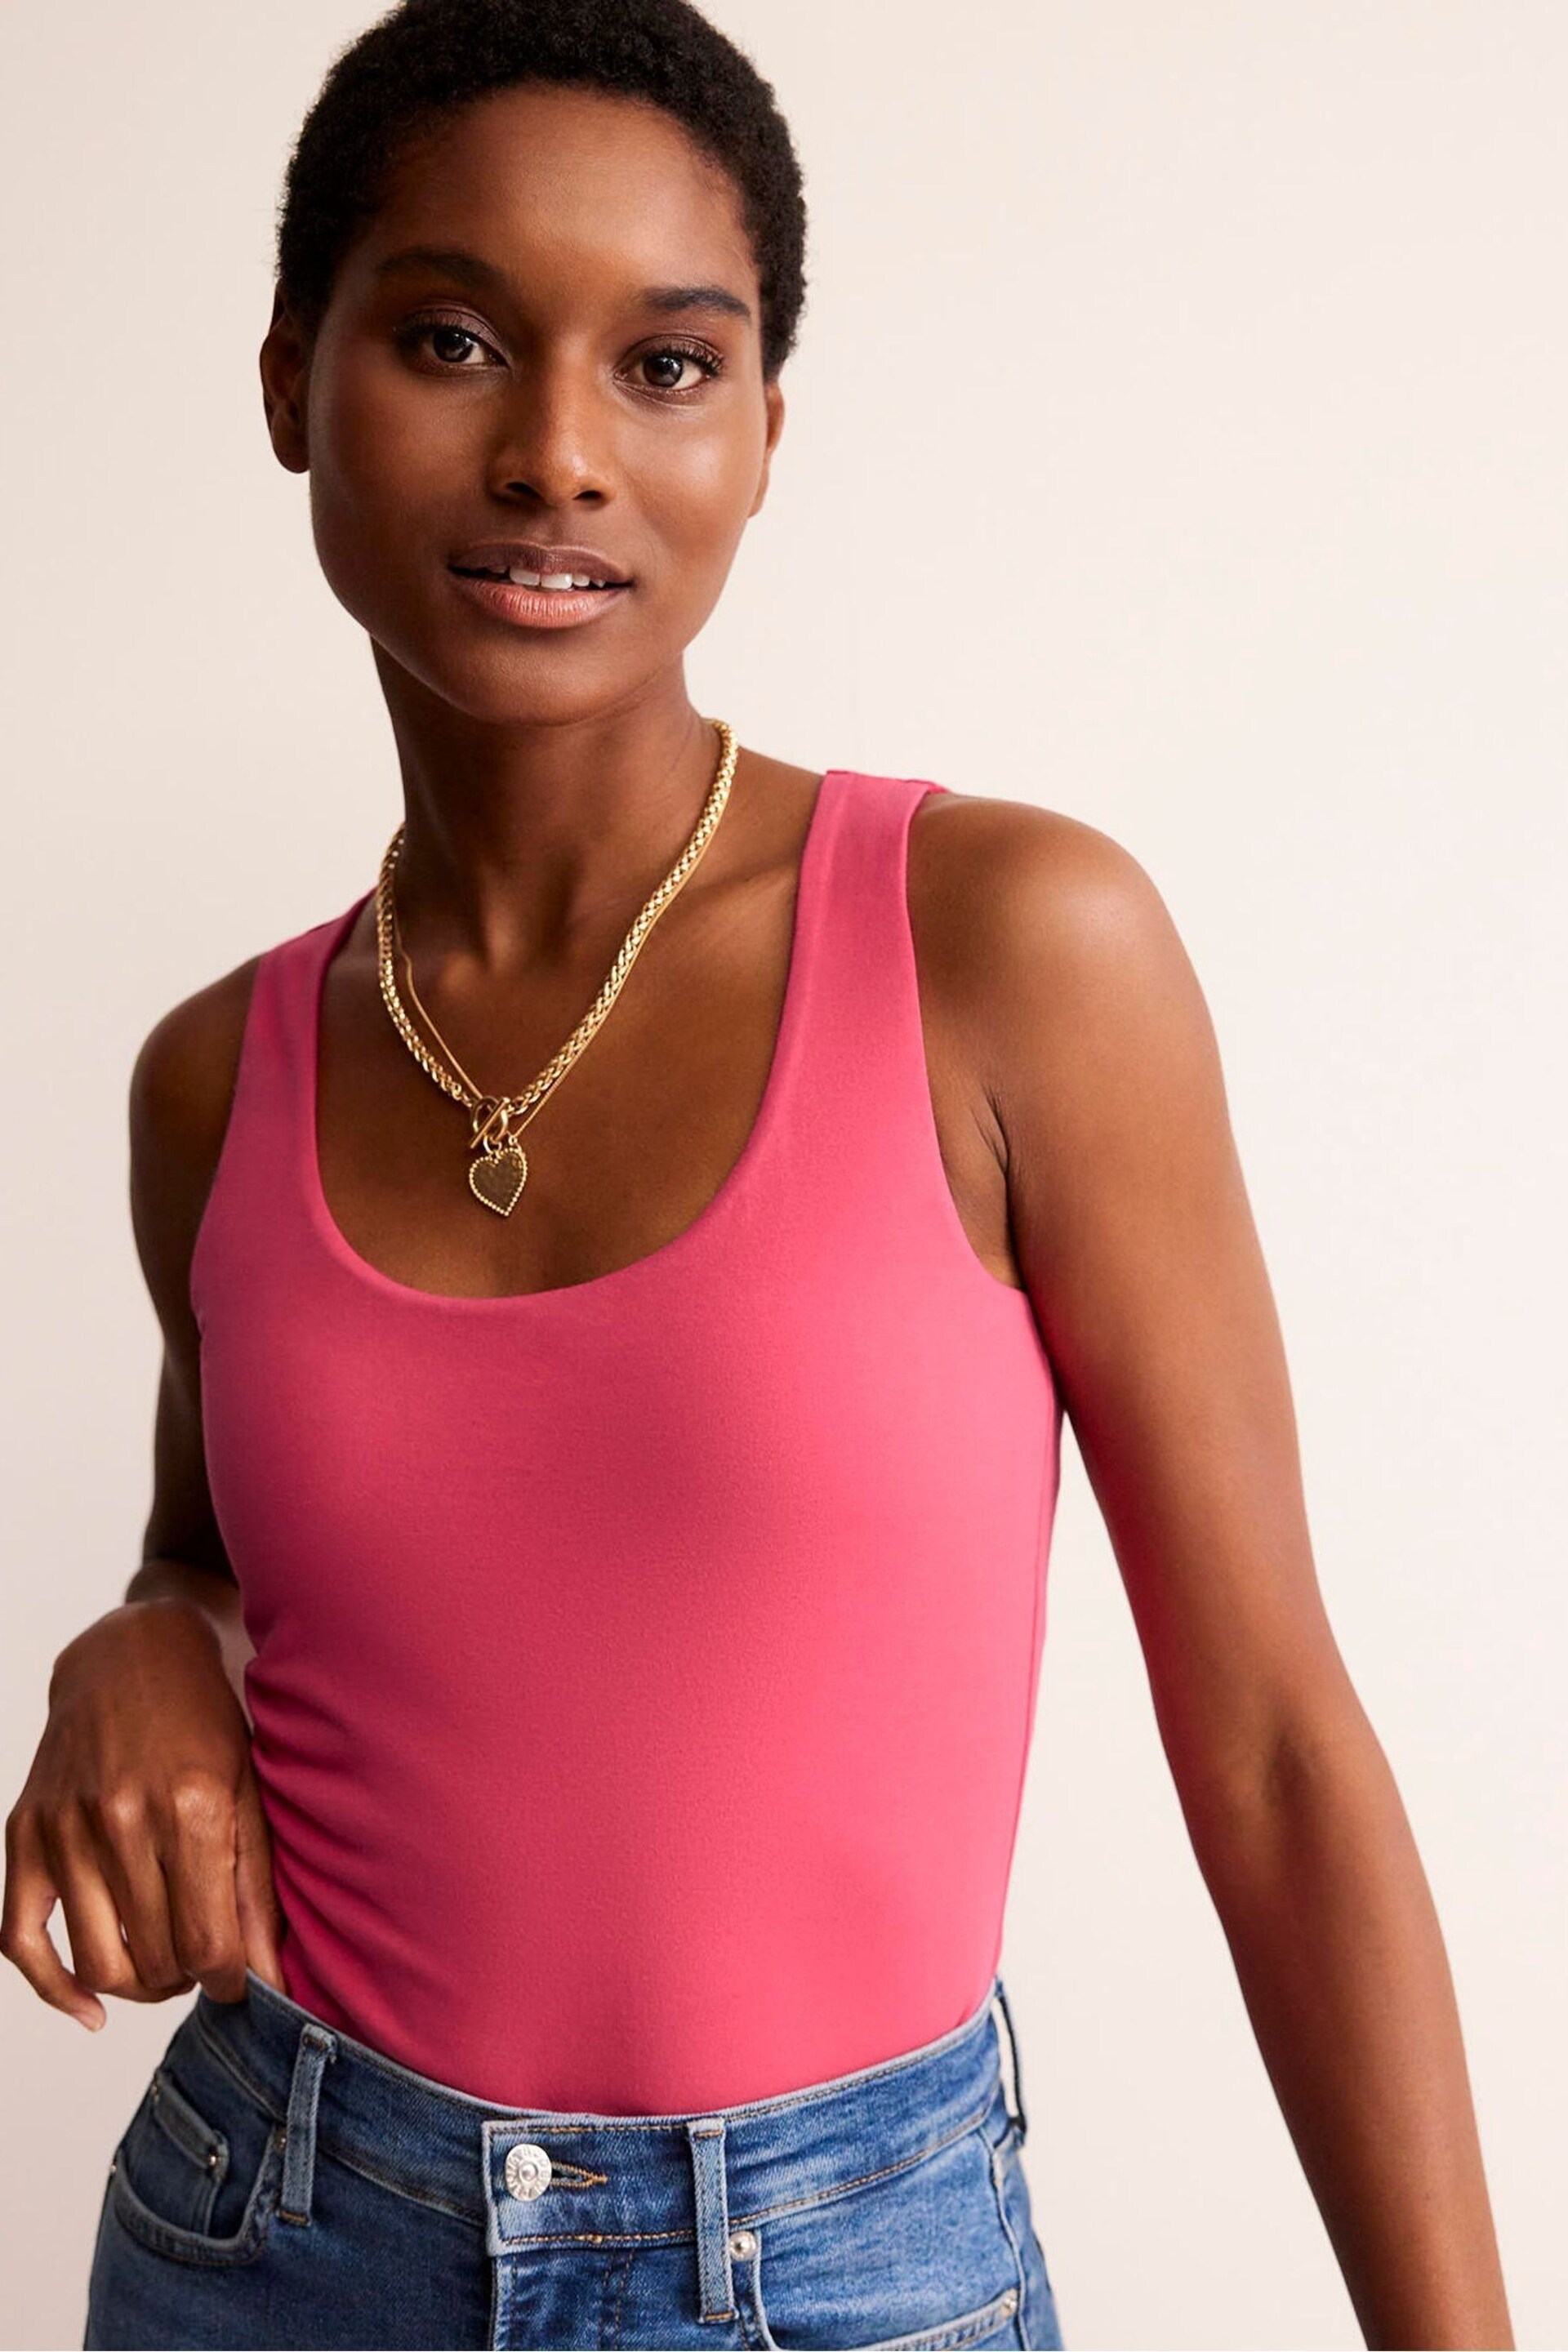 Boden Pink Double Layer Scoop Neck Vest - Image 1 of 5